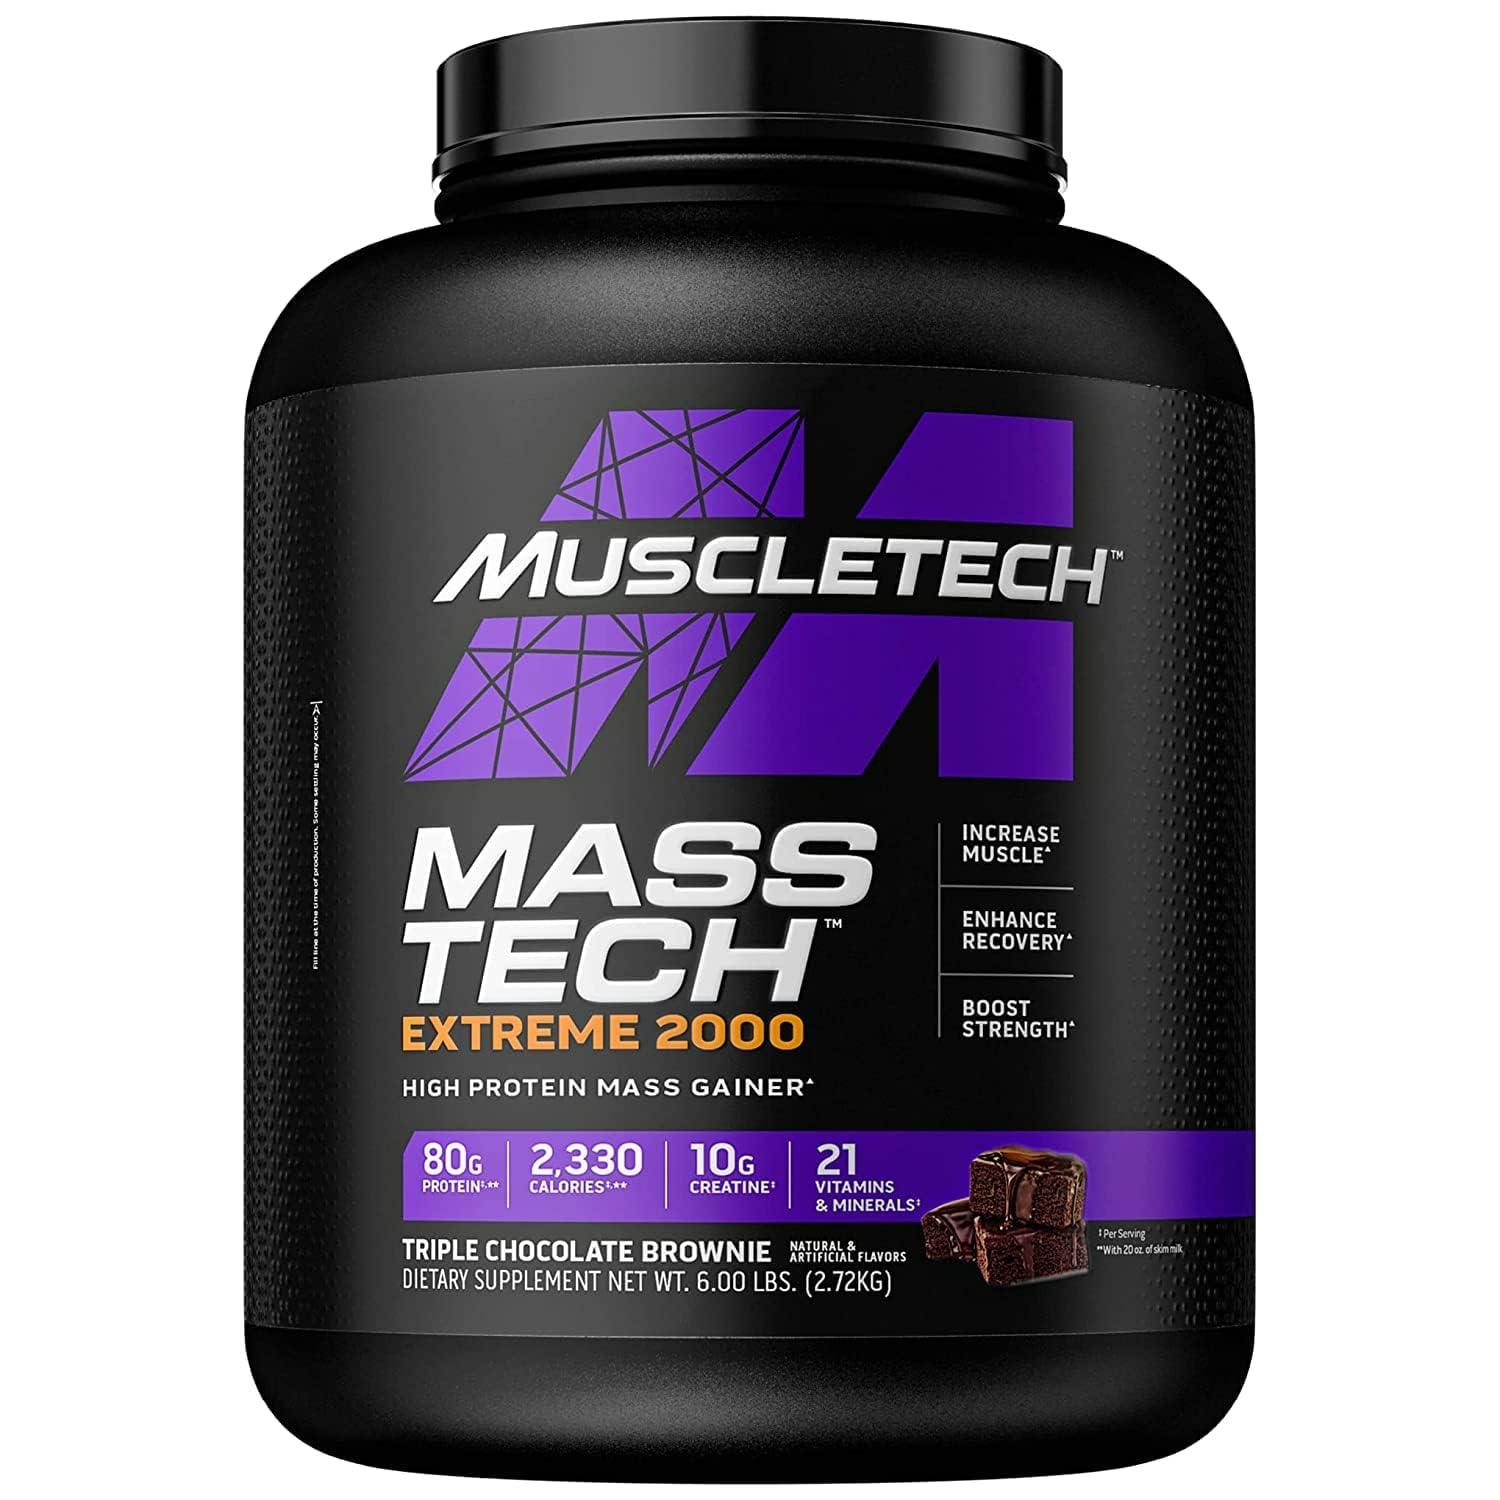 MuscleTech Mass Gainer Mass-Tech Extreme 2000, Muscle Builder Whey Protein Powder, Protein + Creatine + Carbs, Max-Protein Weight Gainer for Women & Men, Vanilla Milkshake, 6lbs (Packaging May Vary)